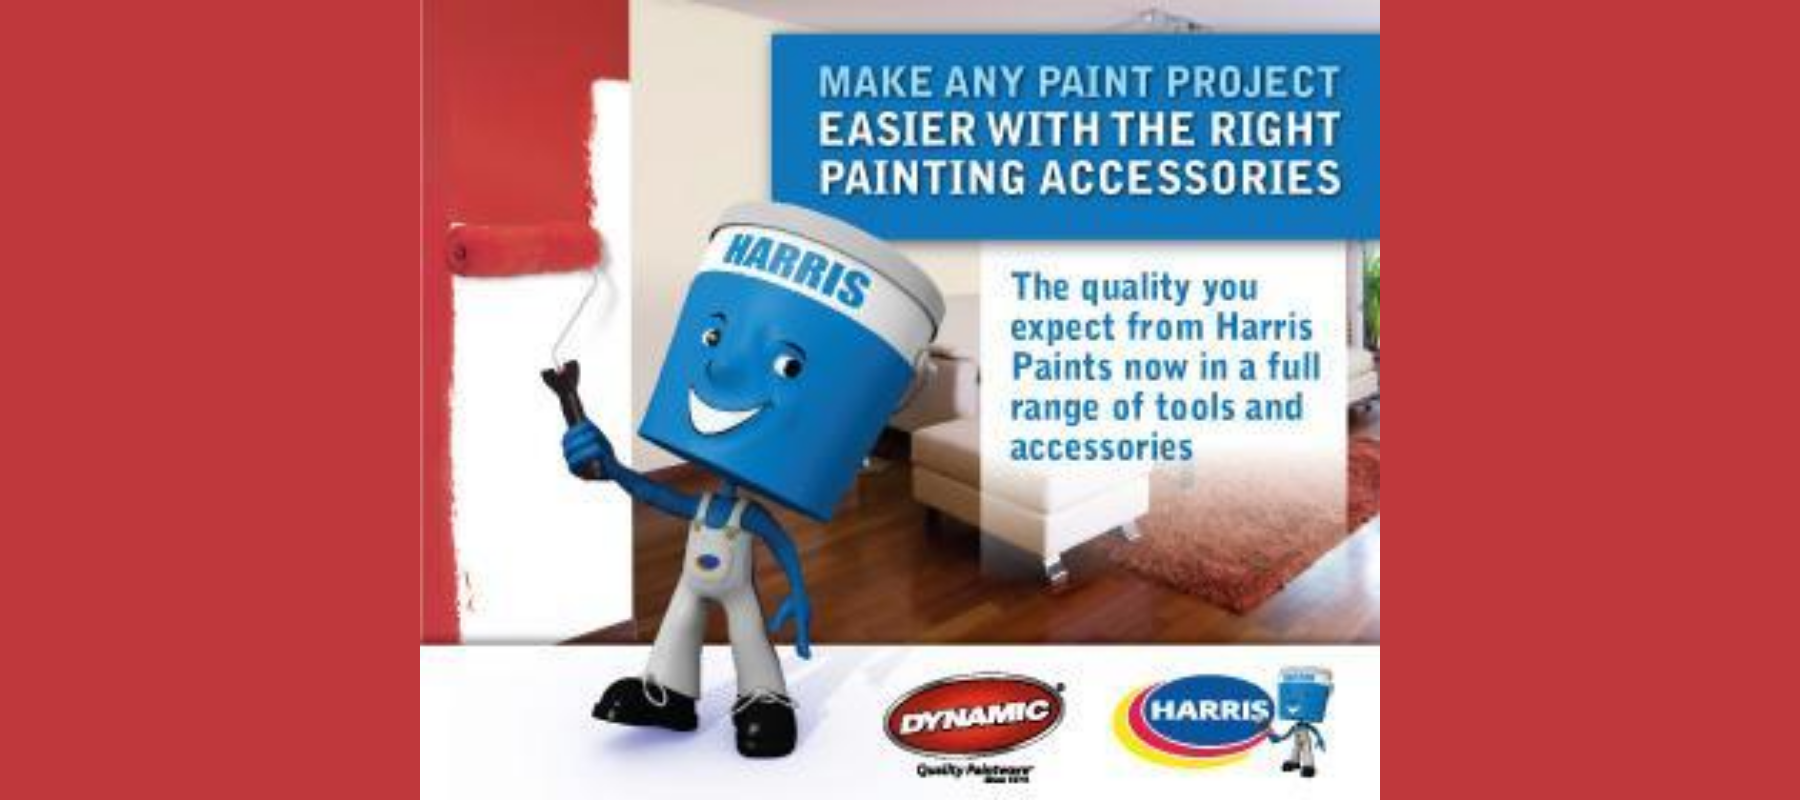 Harris Paints Partners with Dynamic Paint Products to Simplify Accessory Selection